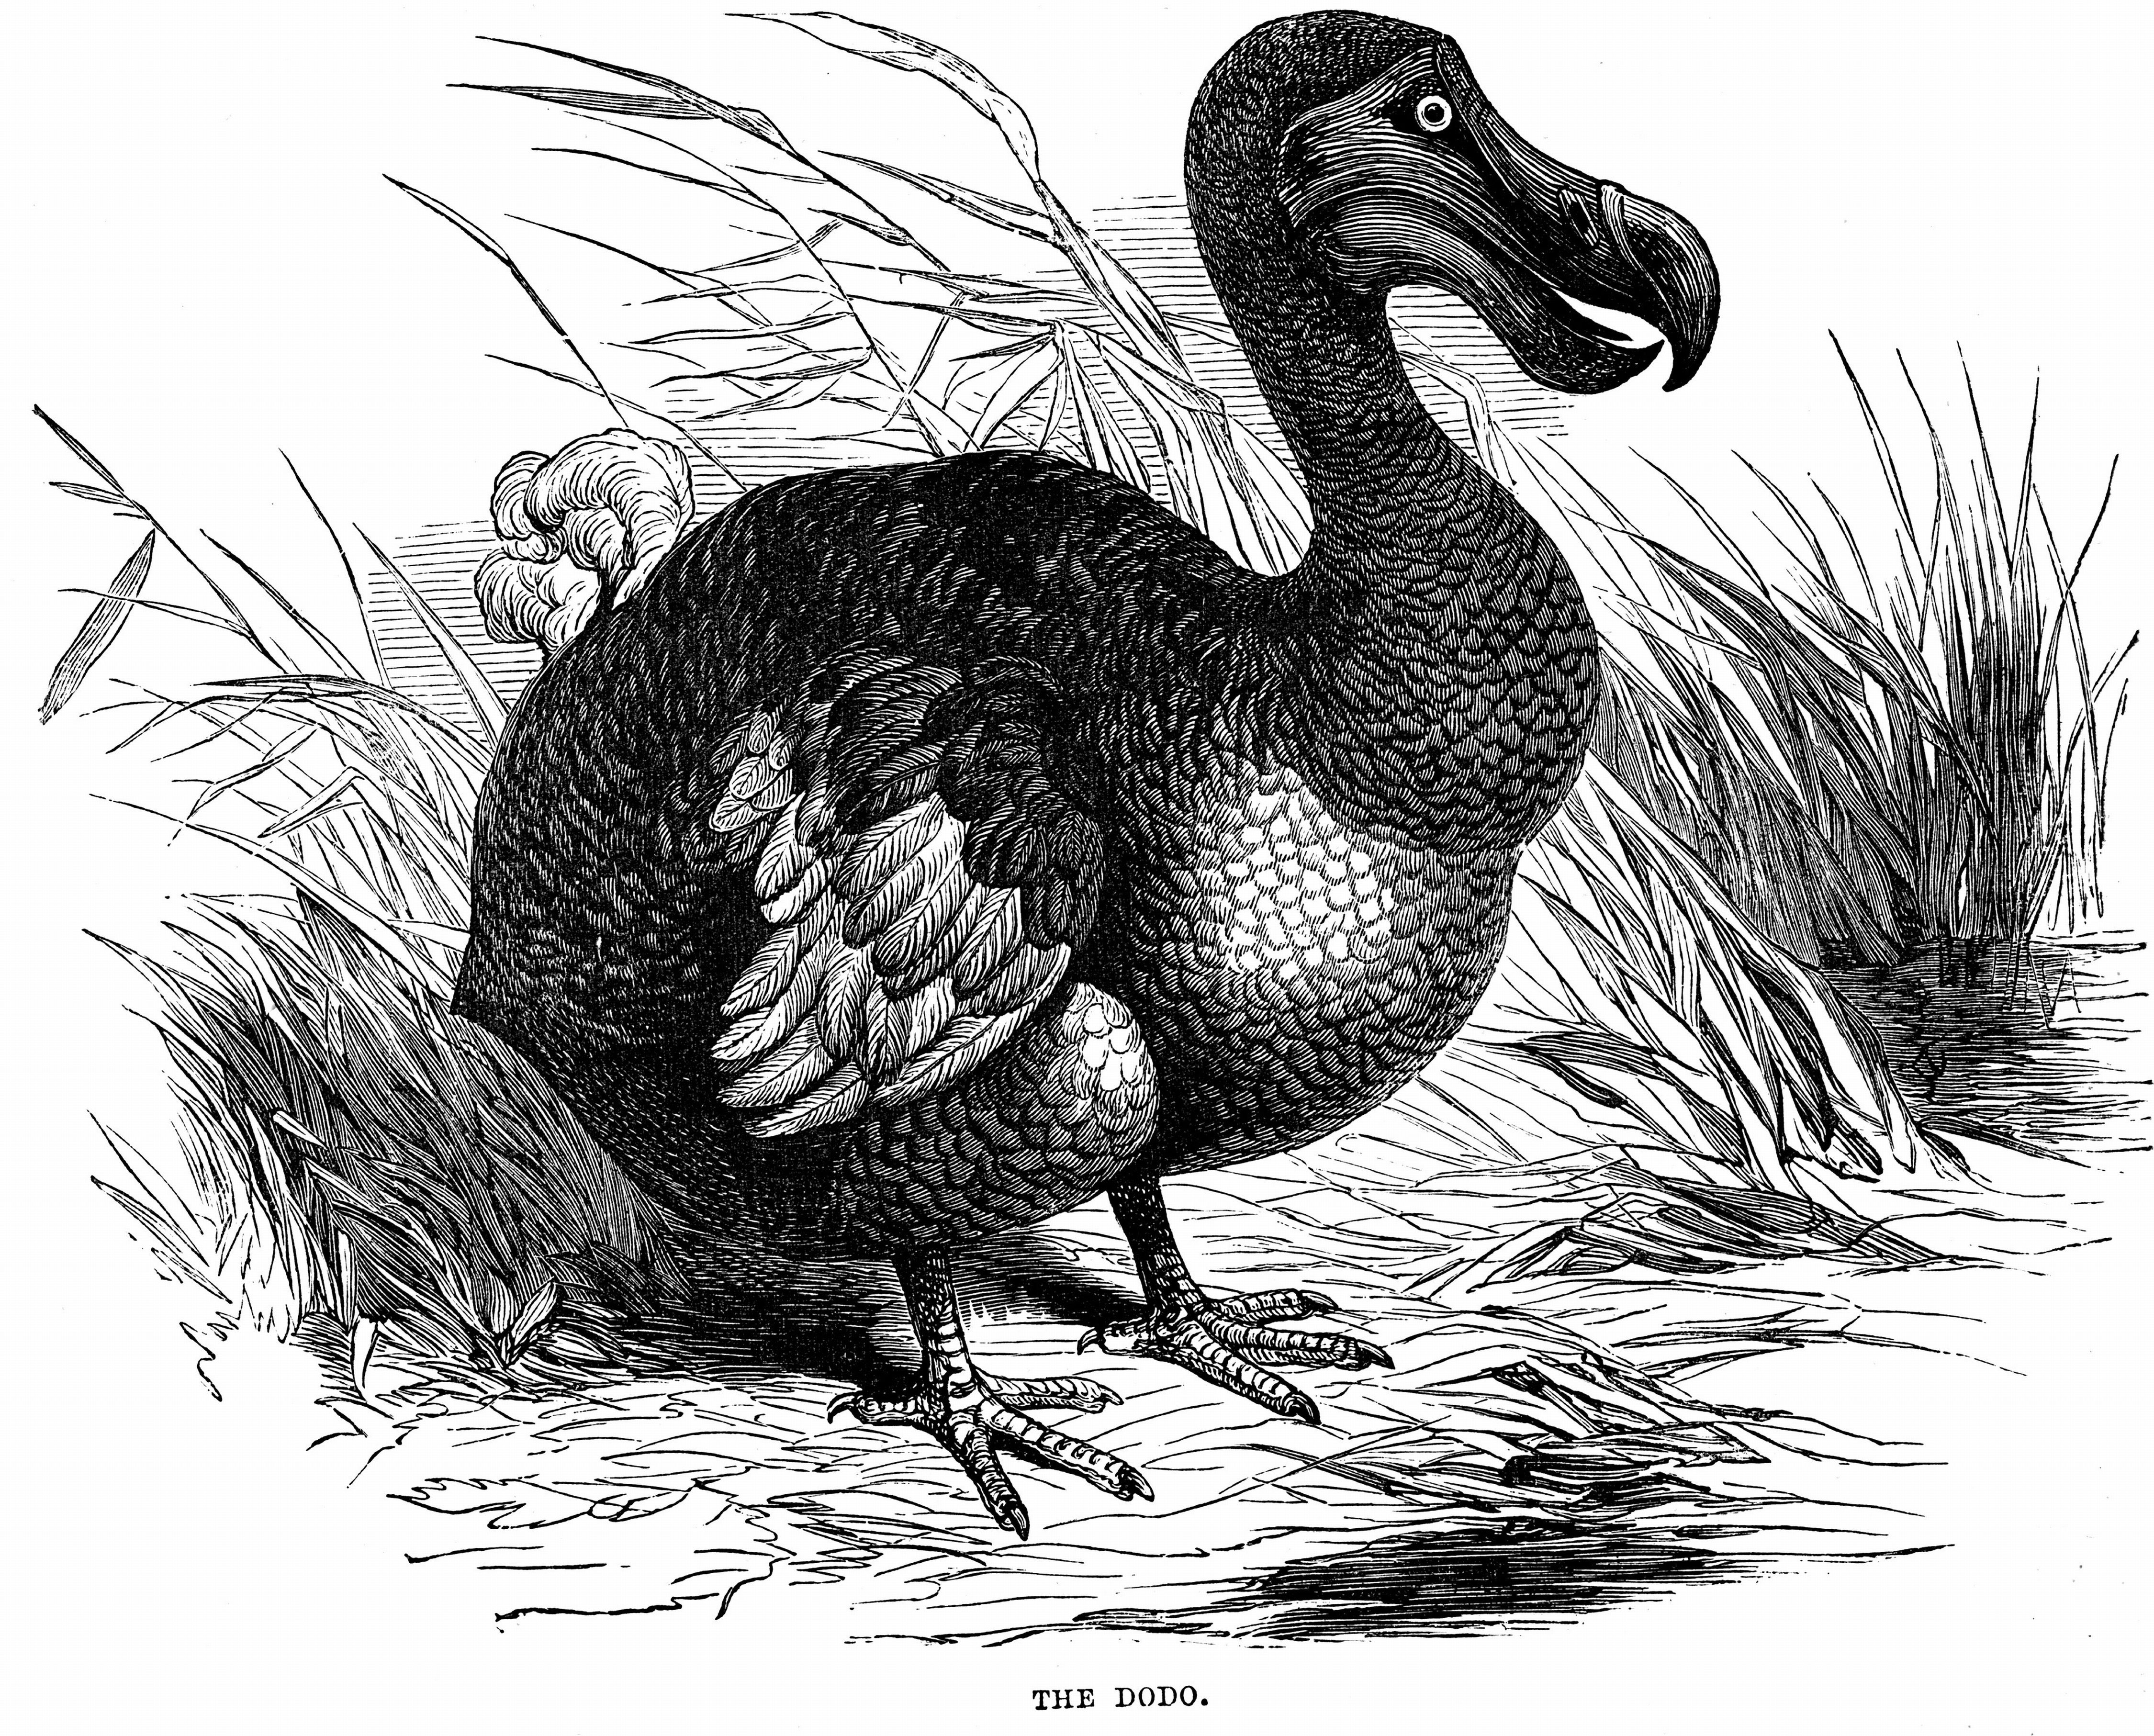 First observed by Portuguese sailors in about 1507, by 1681 the Dodo was extinct due to a combination of circumstances including killing for food by men, introduction of animals such as the rate, and destruction of habitat. Wood engraving 1884. (Universal History Archive—Getty Images)